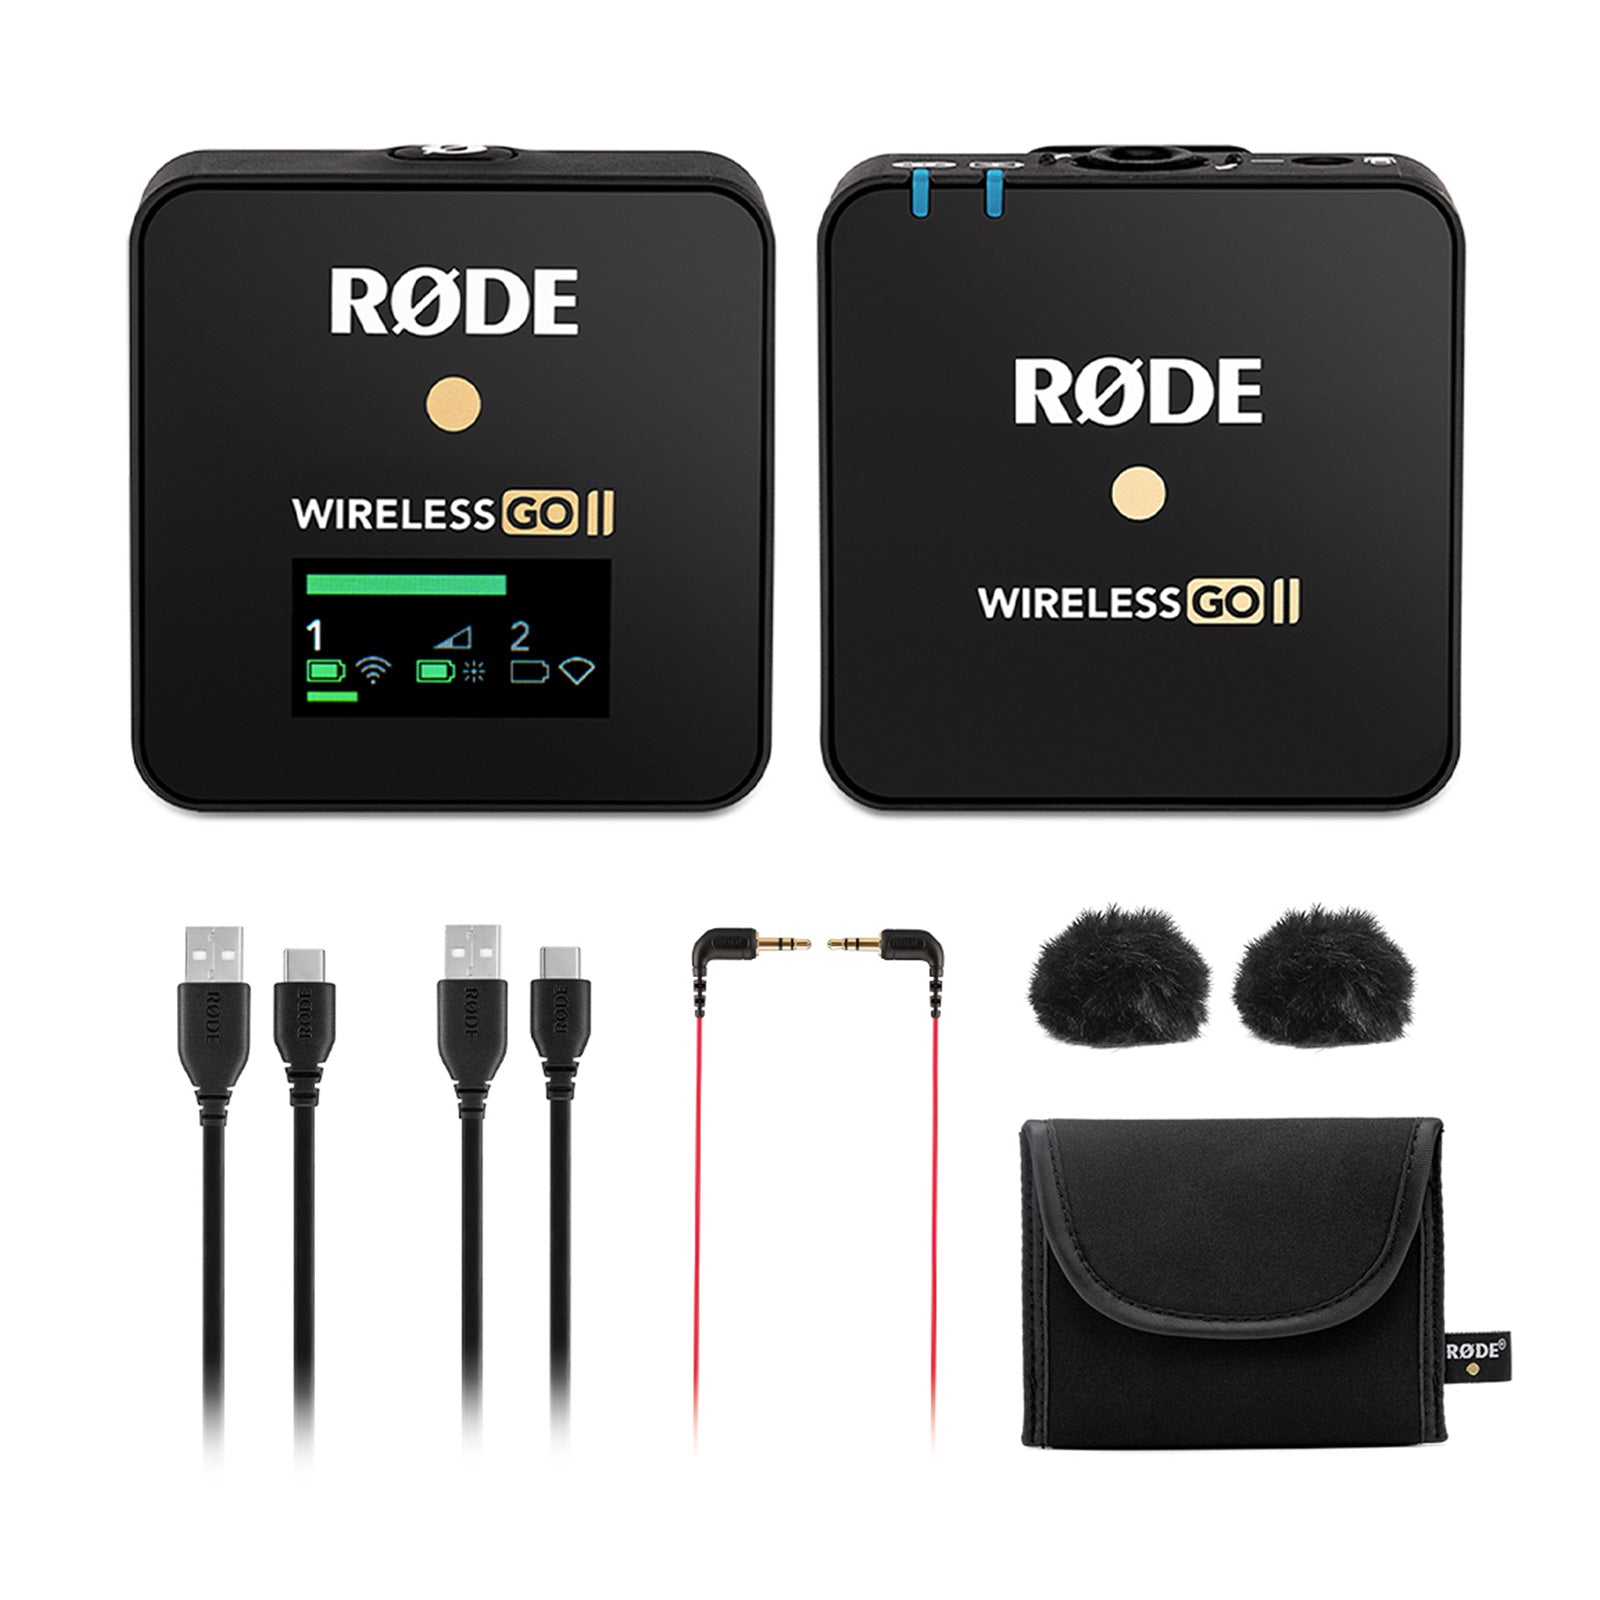 Rode Wireless Go II箱説明書はありません